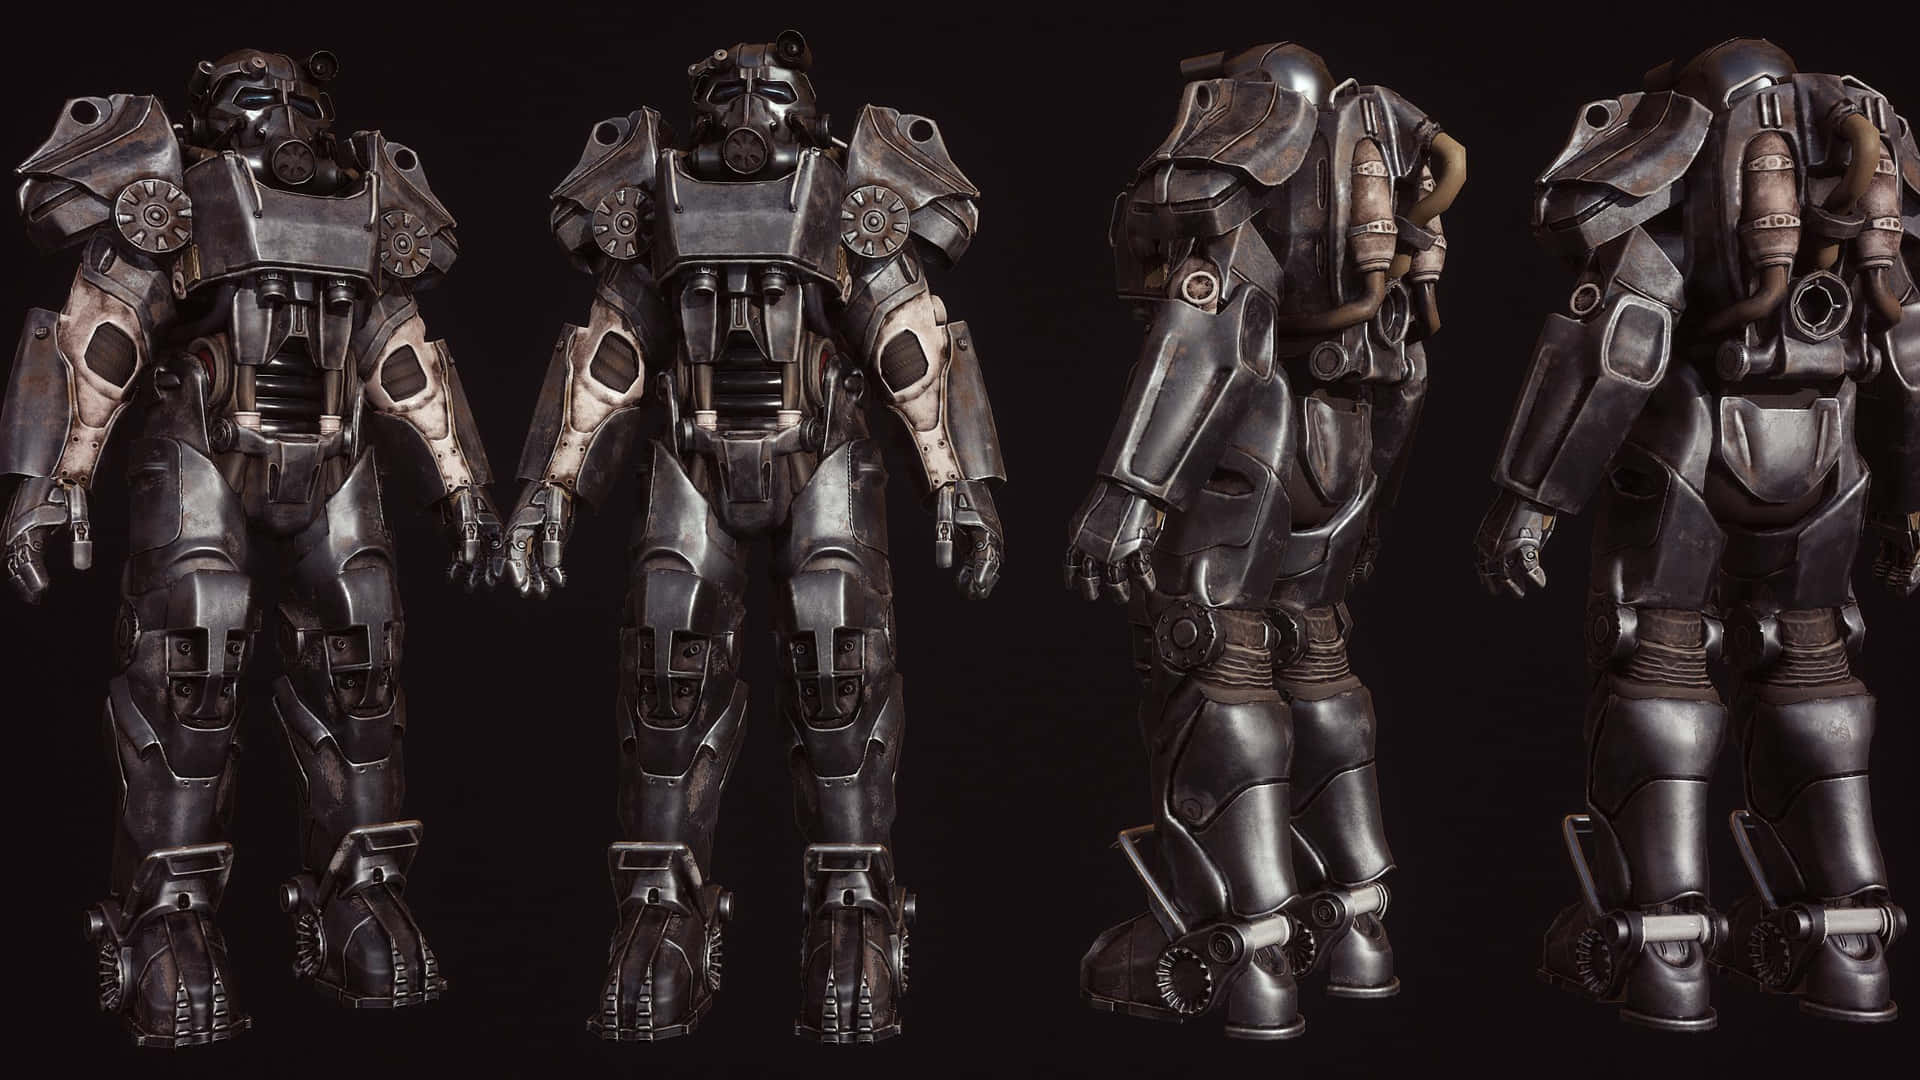 Warrior in Advanced Power Armor from Fallout 4 Wallpaper